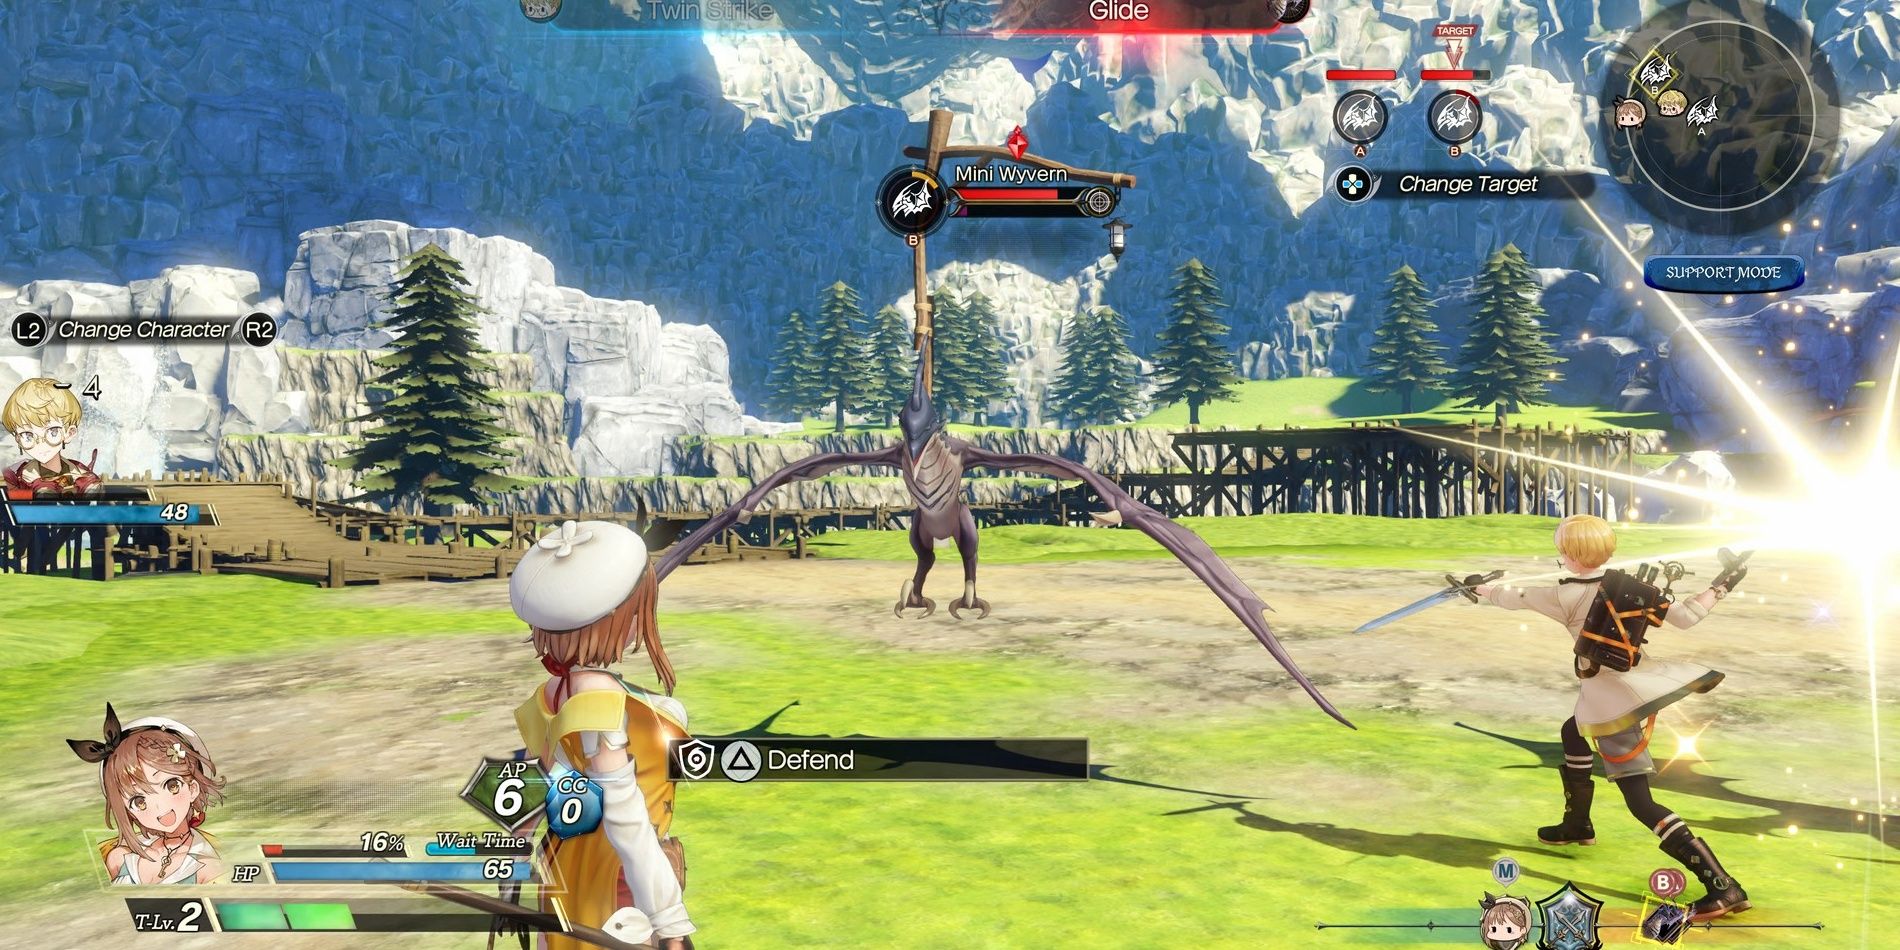 Switching the enemy target in Atelier Ryza 2